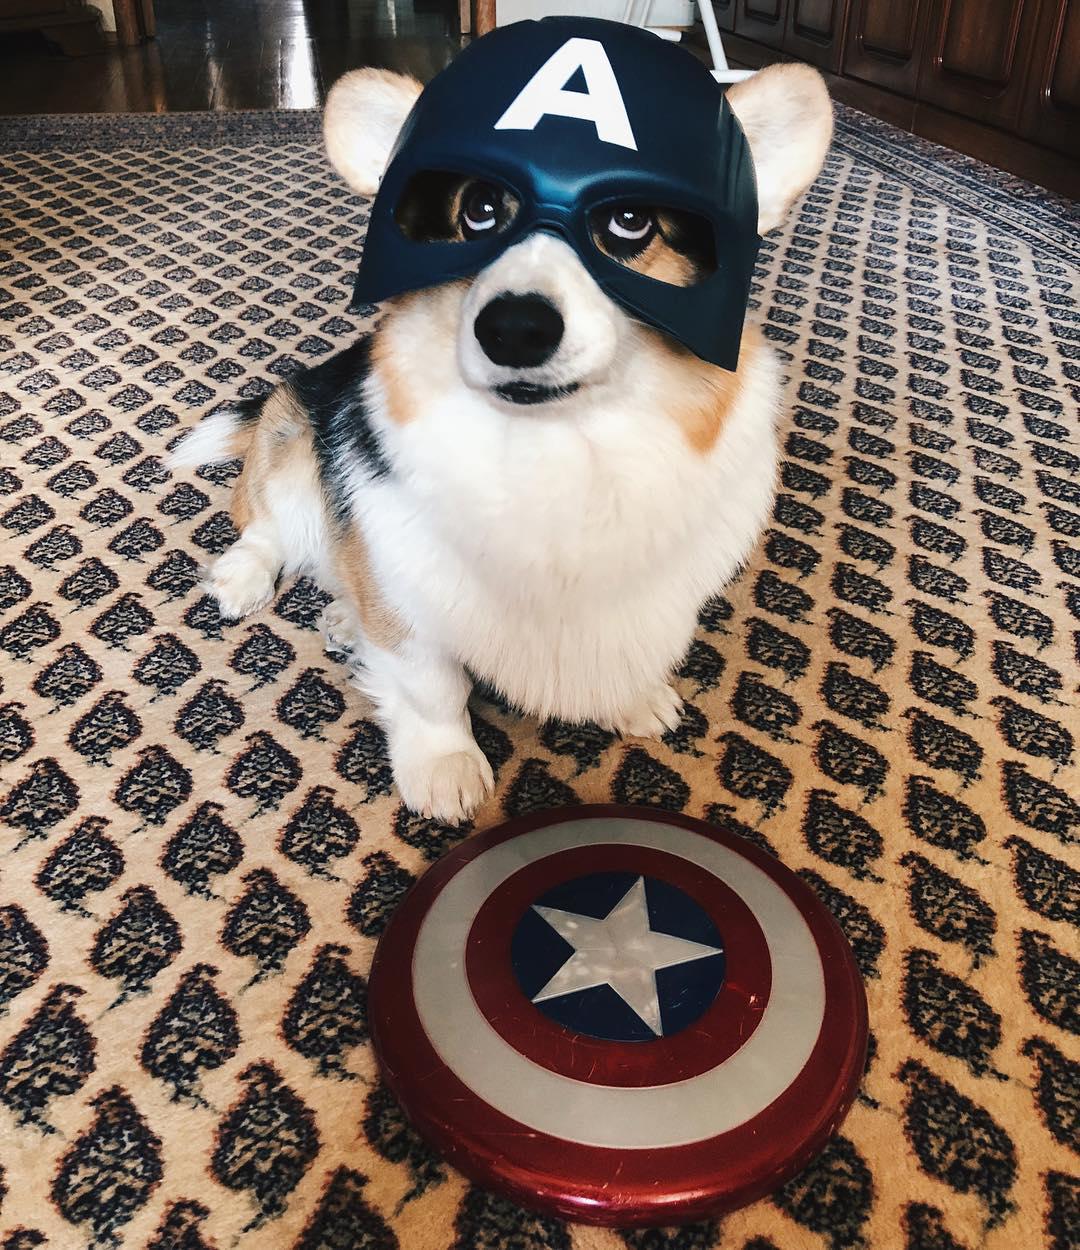 Corgi sitting on the floor with a Captain America head piece and shield on the floor